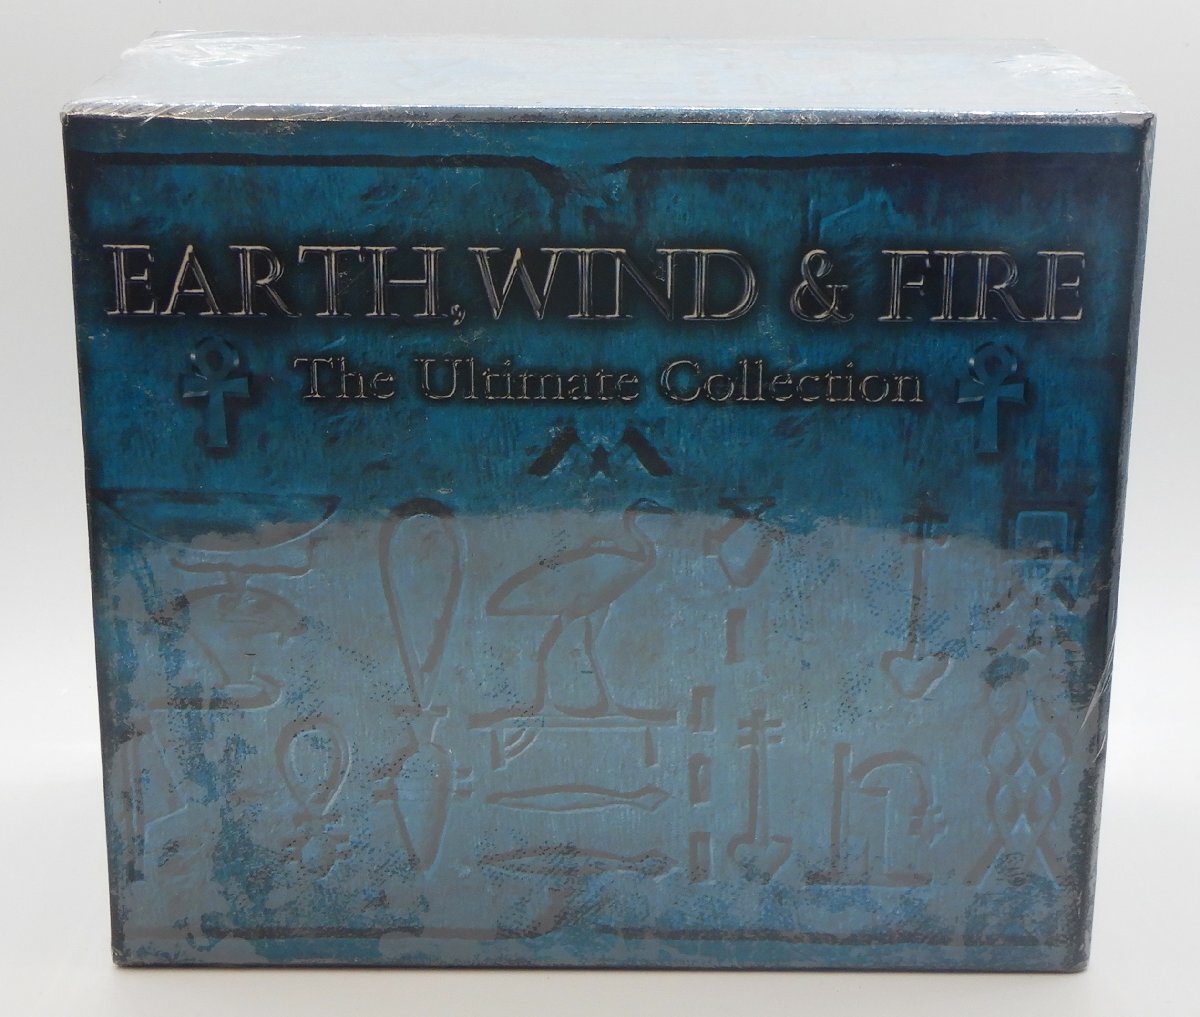 EARTH,WIND & FIRE The Ultimate Collection 創世神話☆8FZ8Z 2273 ソニー☆未開封品☆Z0404901の画像2